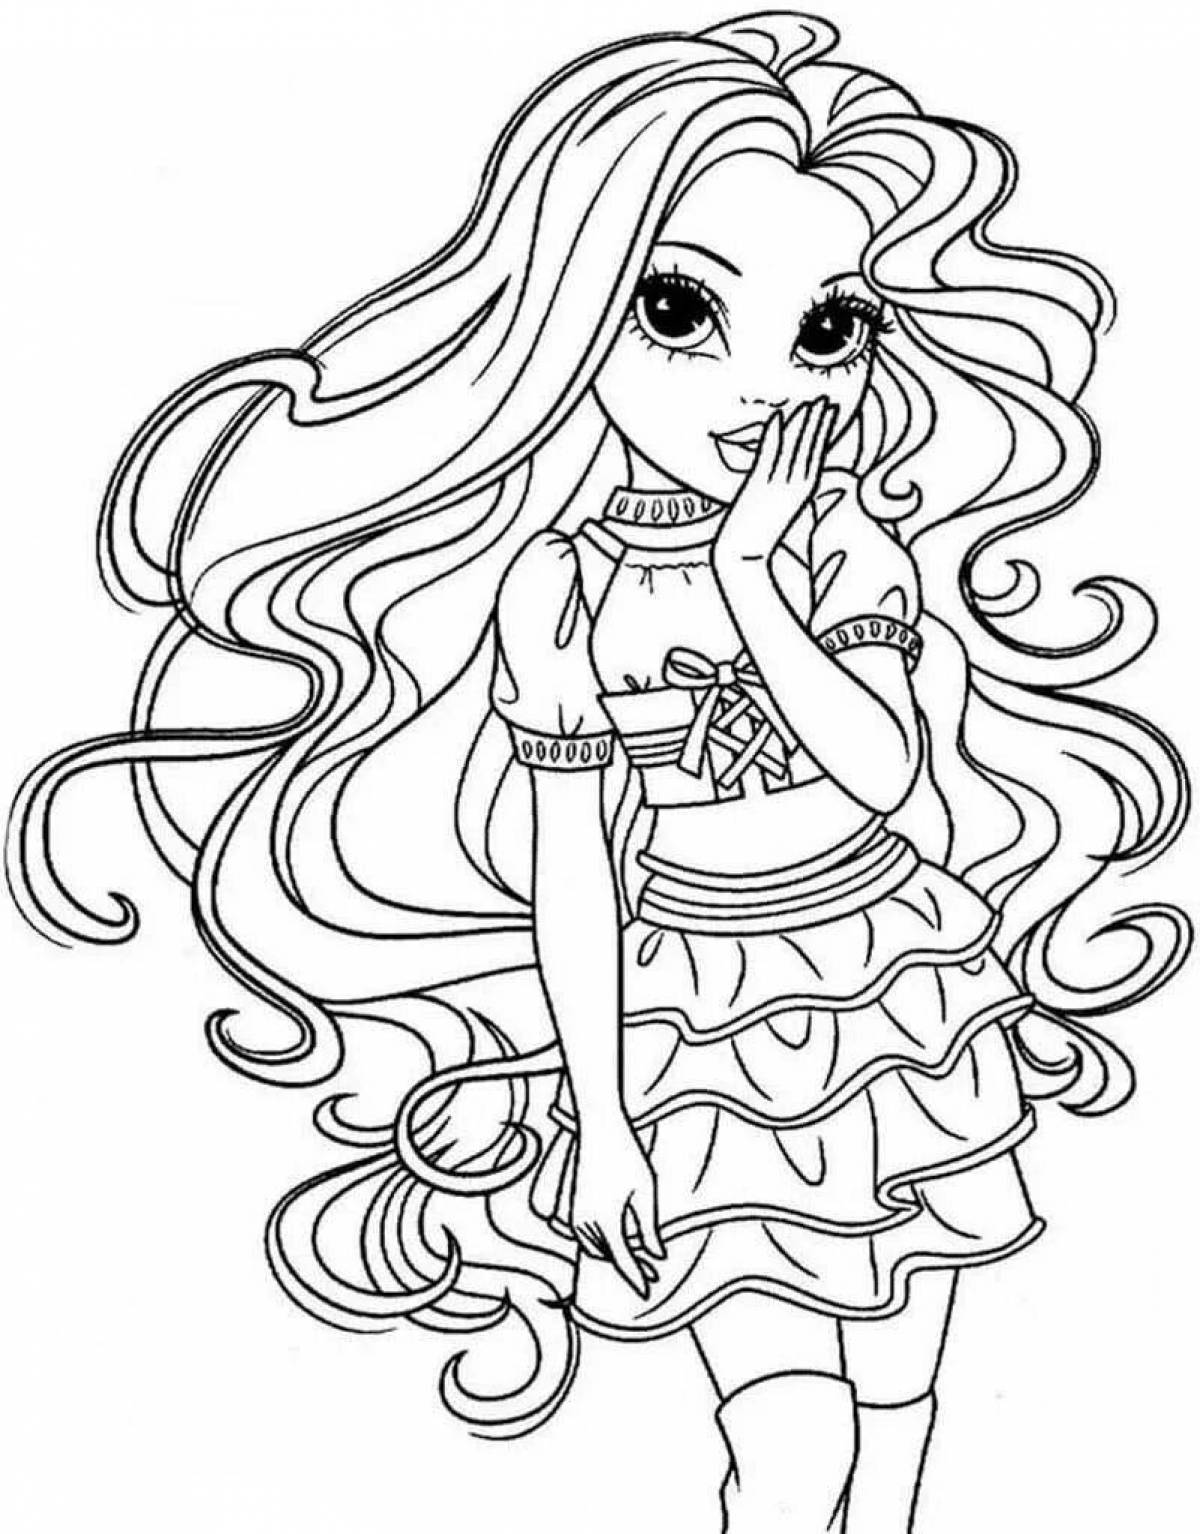 Awesome new coloring pages